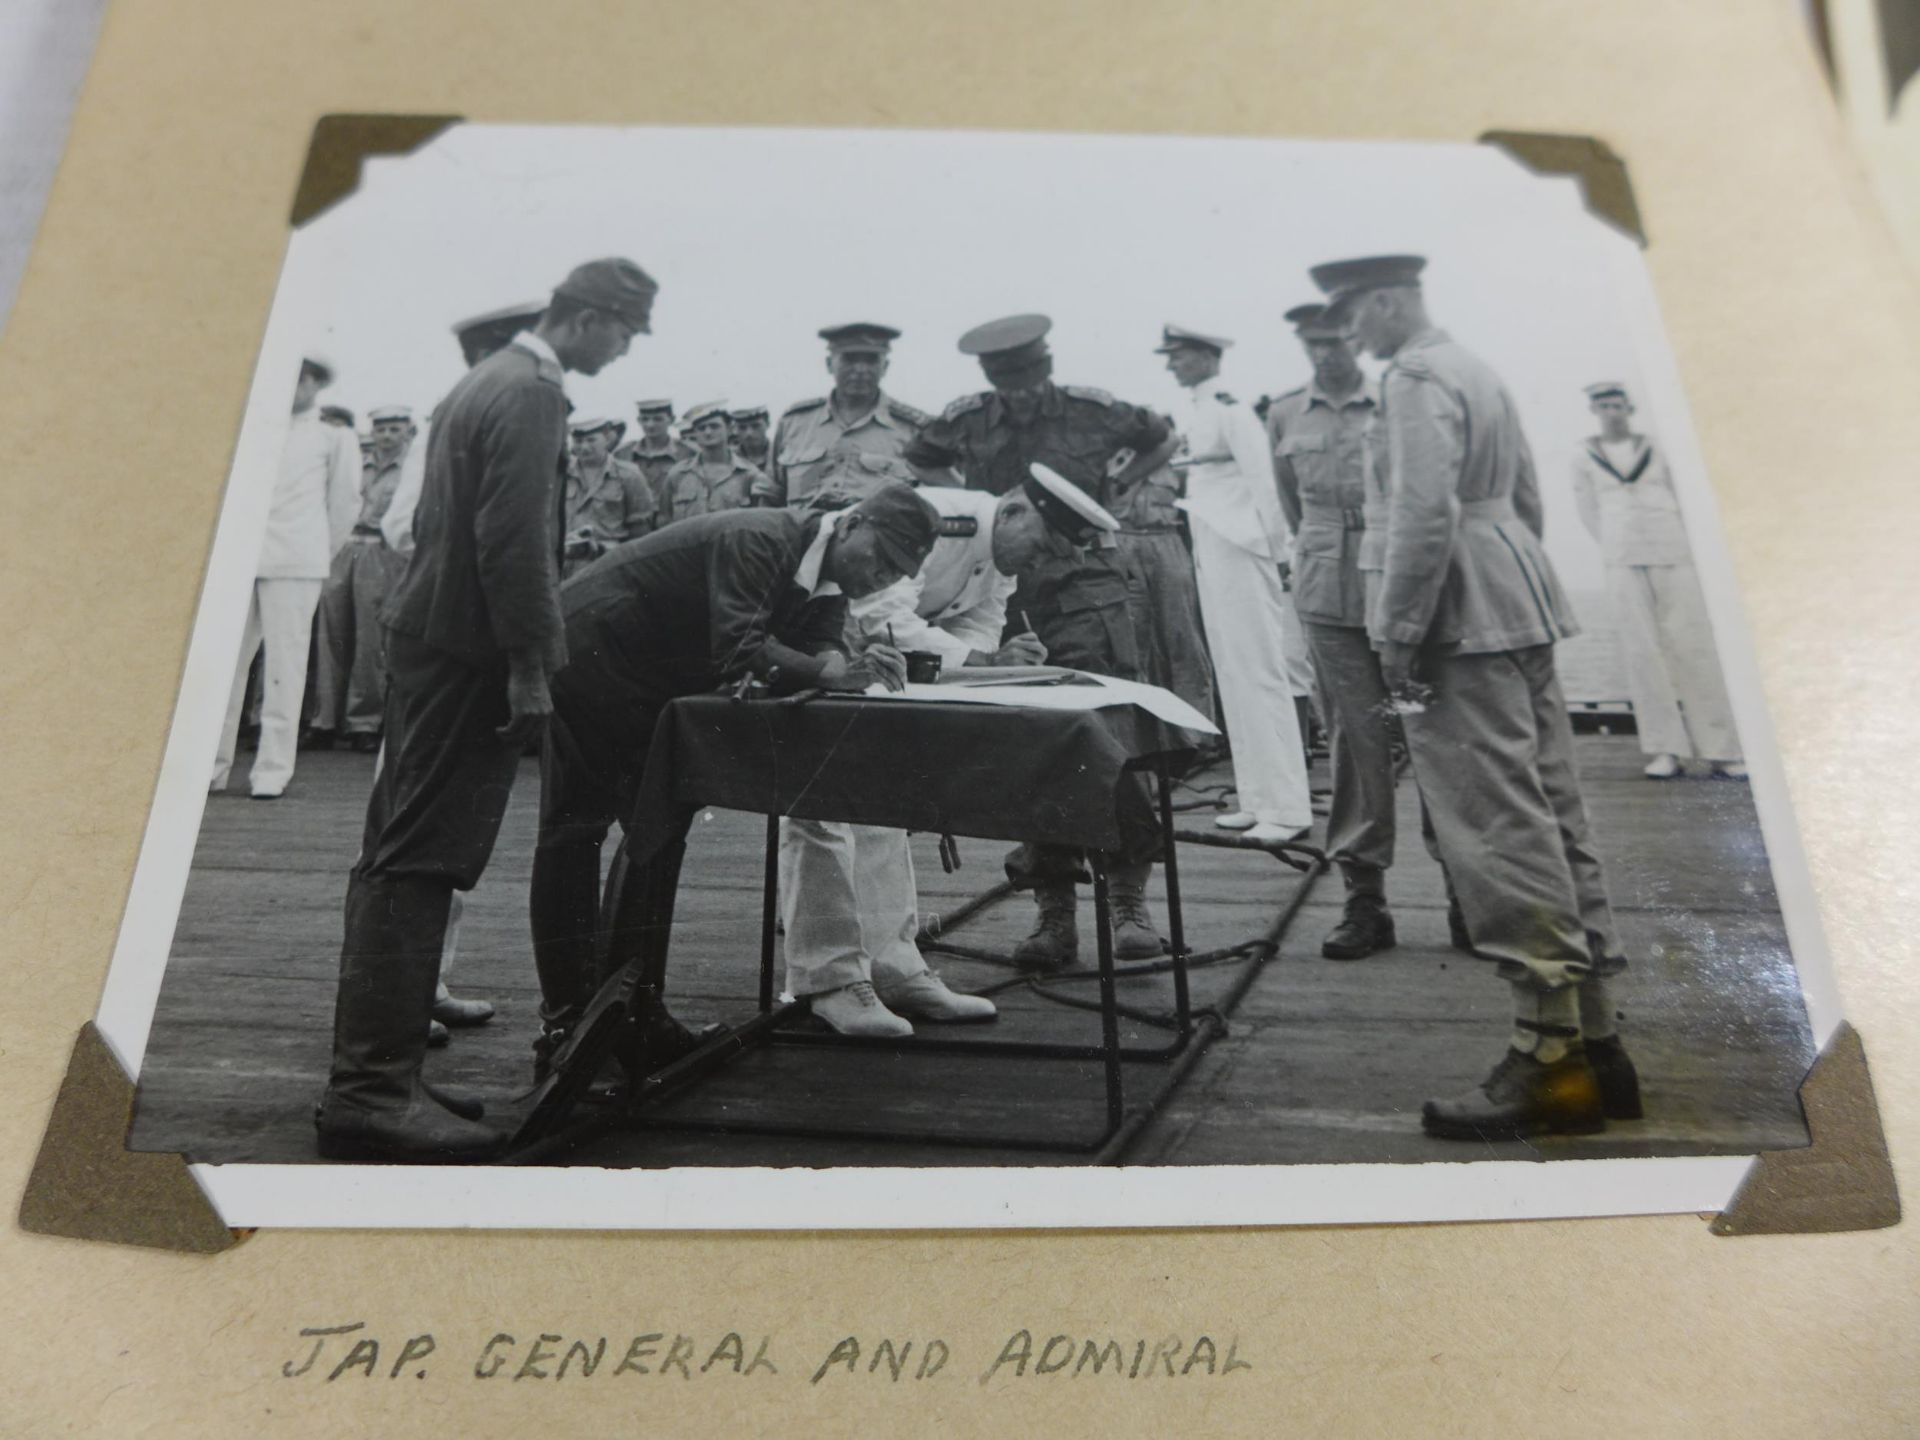 A WORLD WAR II PHOTOGRAPH ALBUM CONTAINING PHOTOGRAPHS OF THE JAPANESE SIGNING OF THE INSTRUMENT - Image 3 of 9